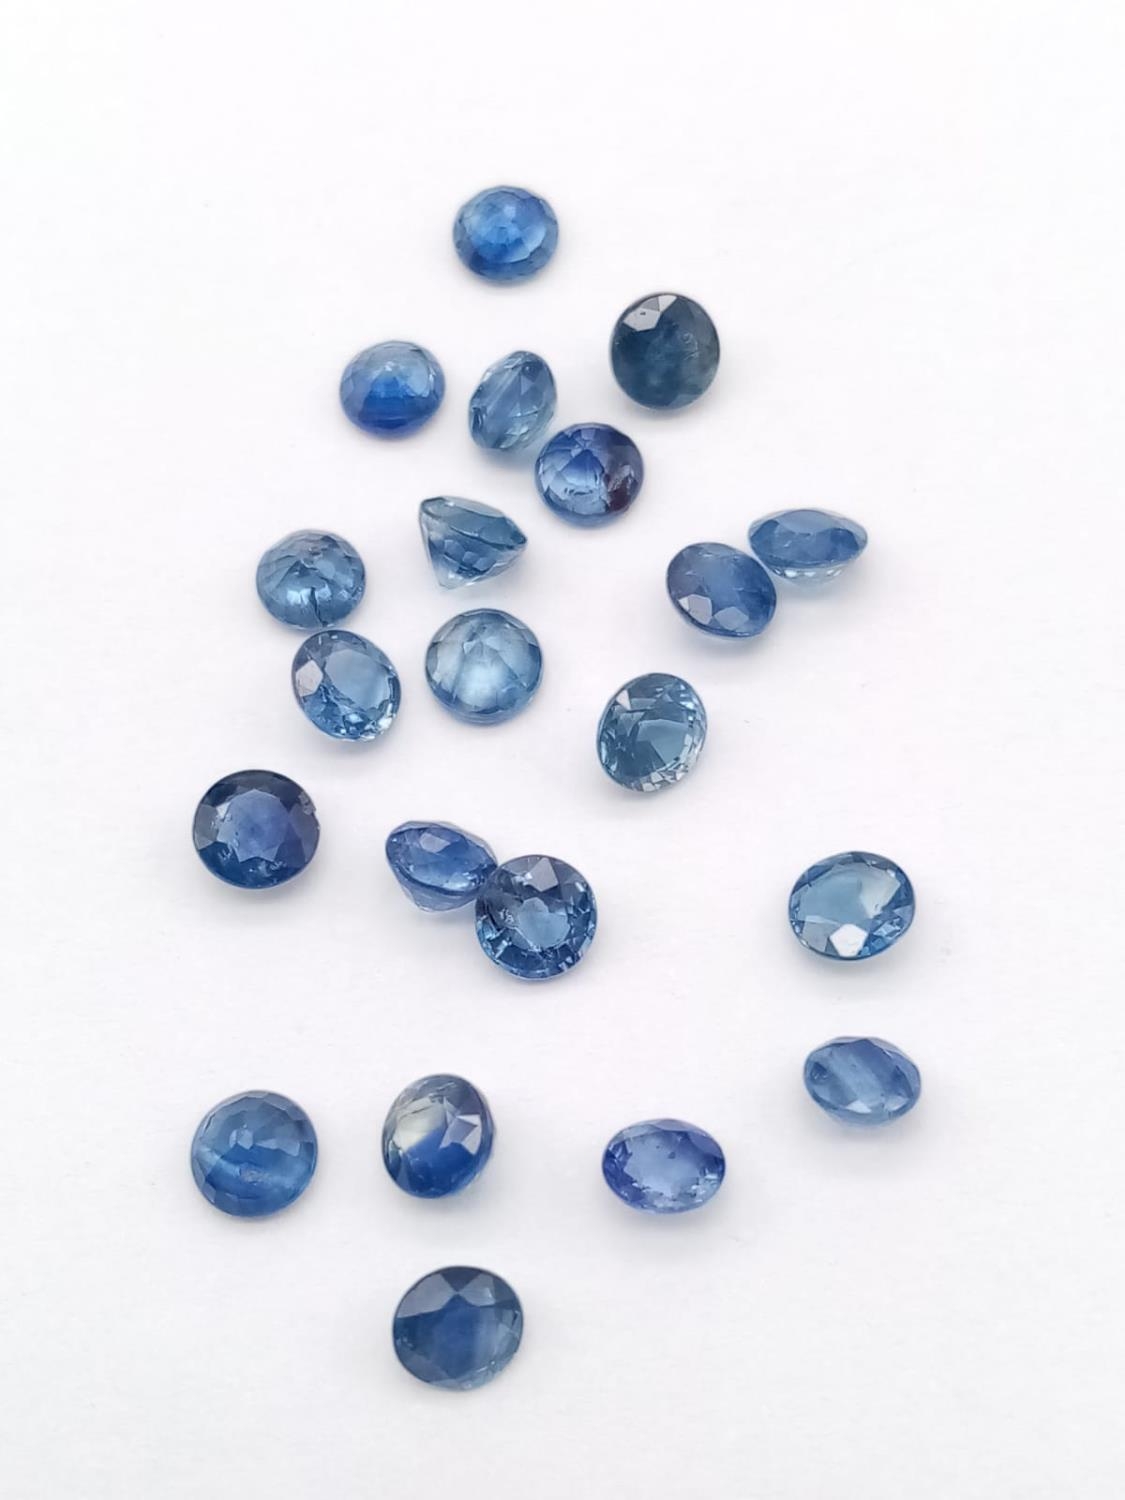 4.90ct loose blue sapphires